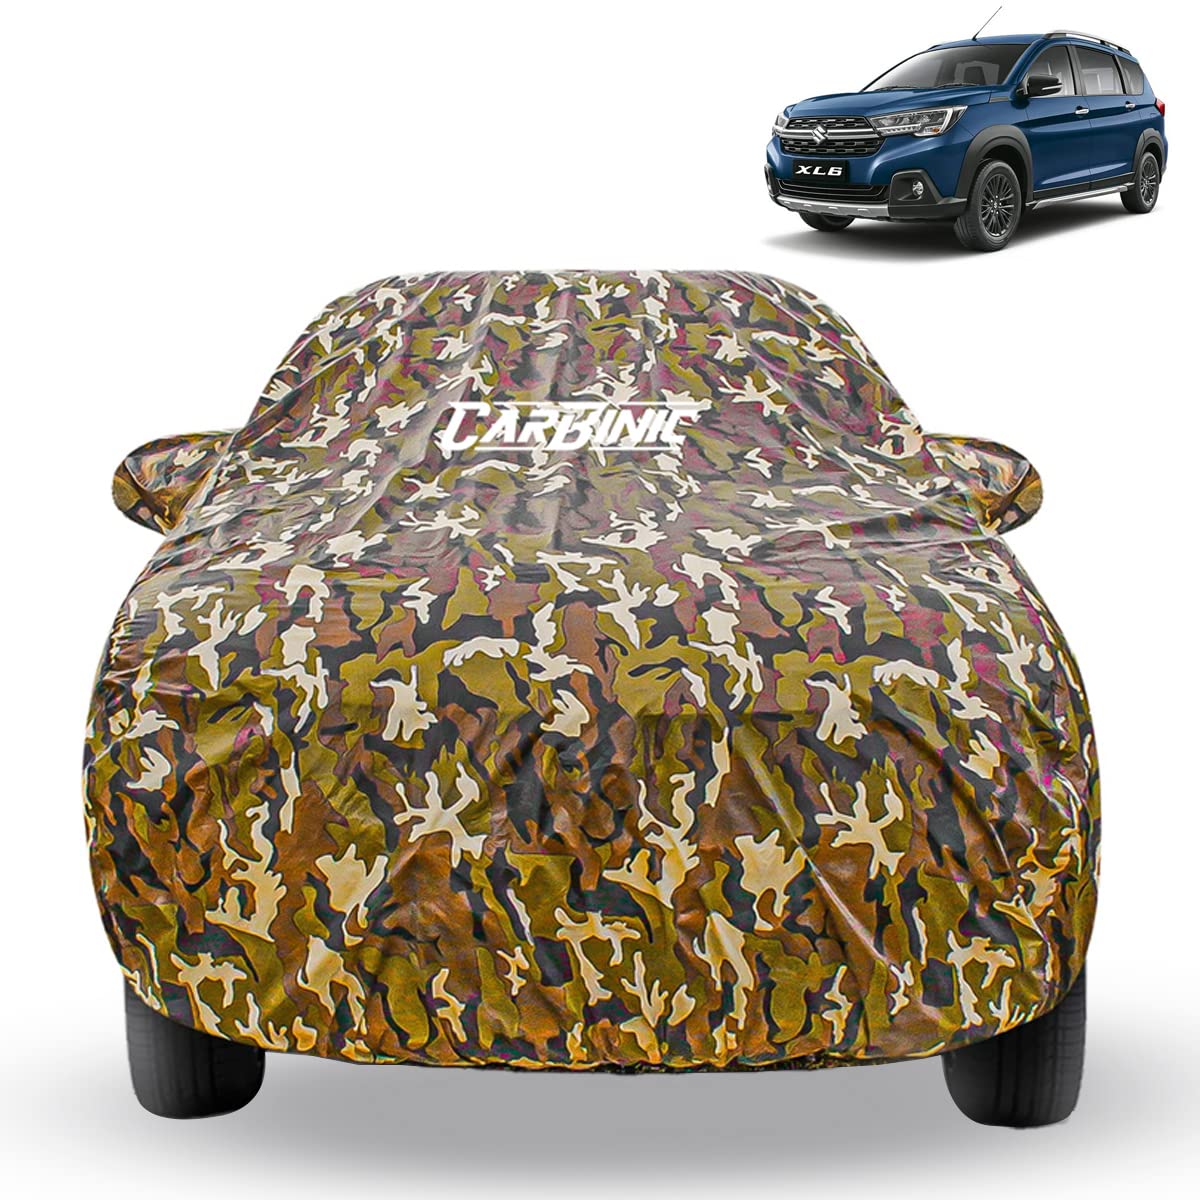 CARBINIC Waterproof Car Body Cover for Maruti Suzuki XL6 2019 | Dustproof UV Proof Car Cover | XL6 Car Accessories | Mirror Pockets & Antenna Triple Stitched | Double Layered Soft Cotton Lining Jungle